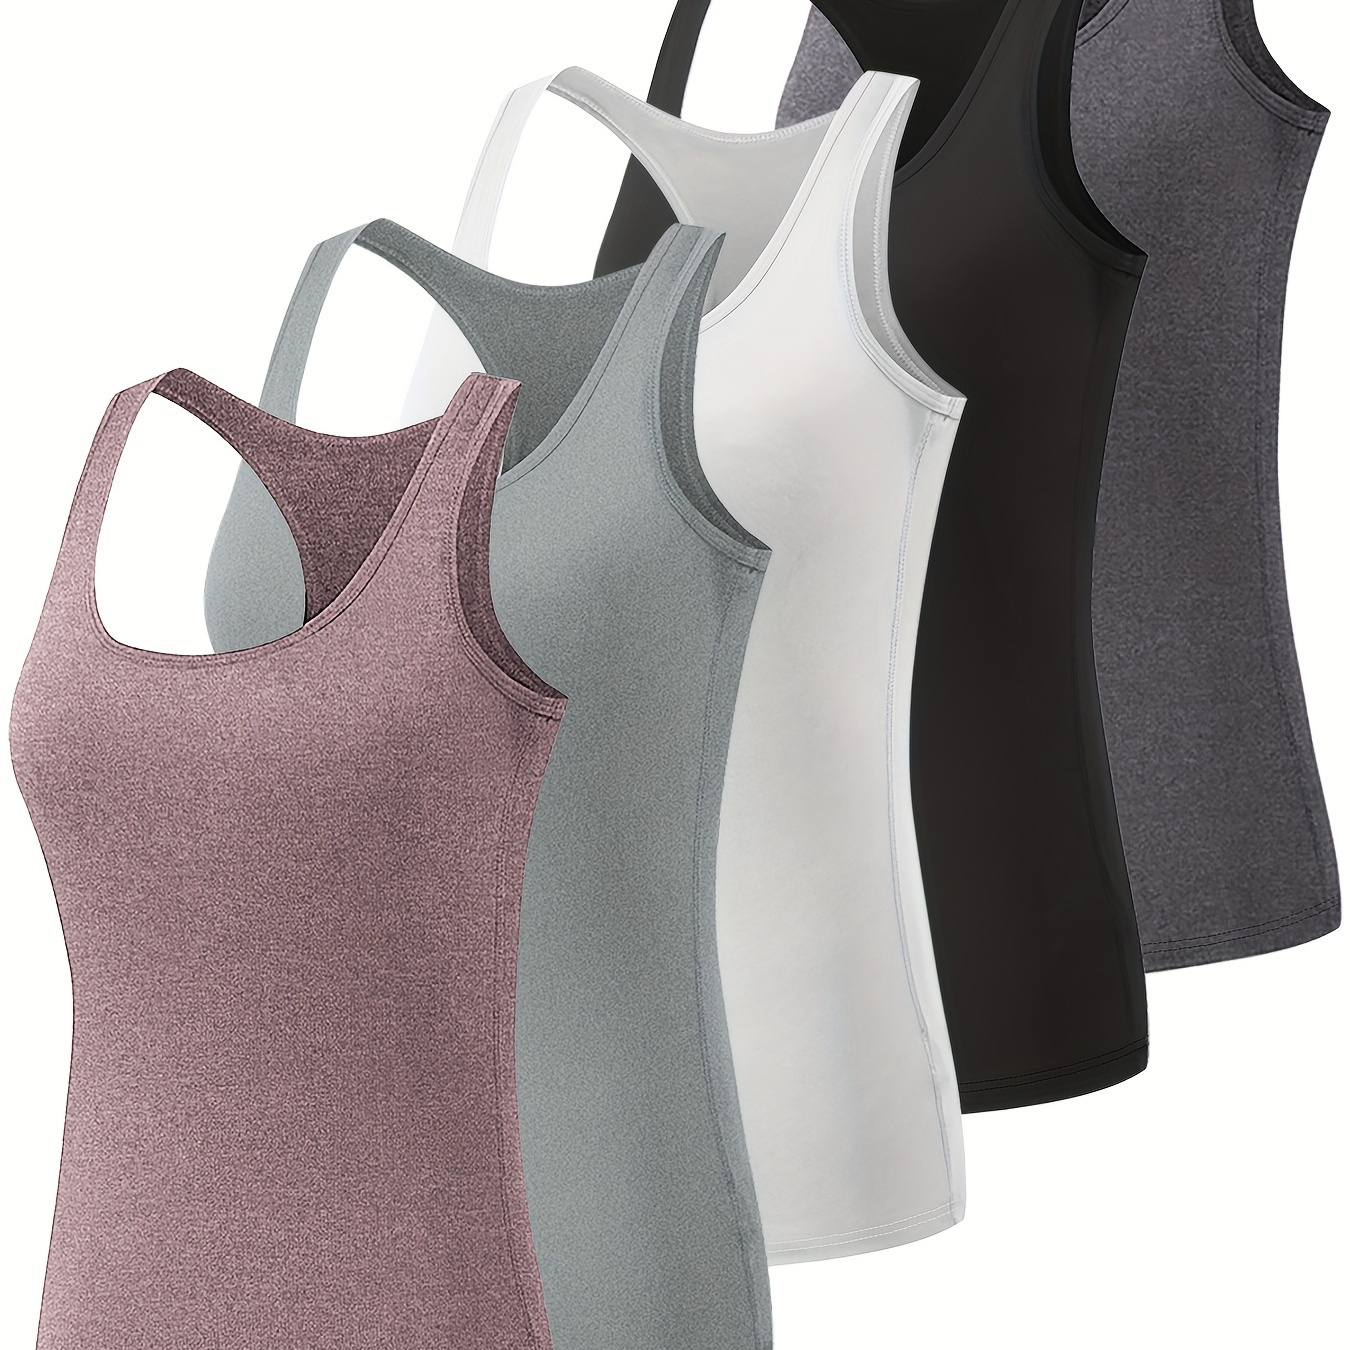 

5pcs Solid Color Sleeveless Vest Tops, Round Neck Racer Back Stretchy Vest T-shirts, Women's Activewear